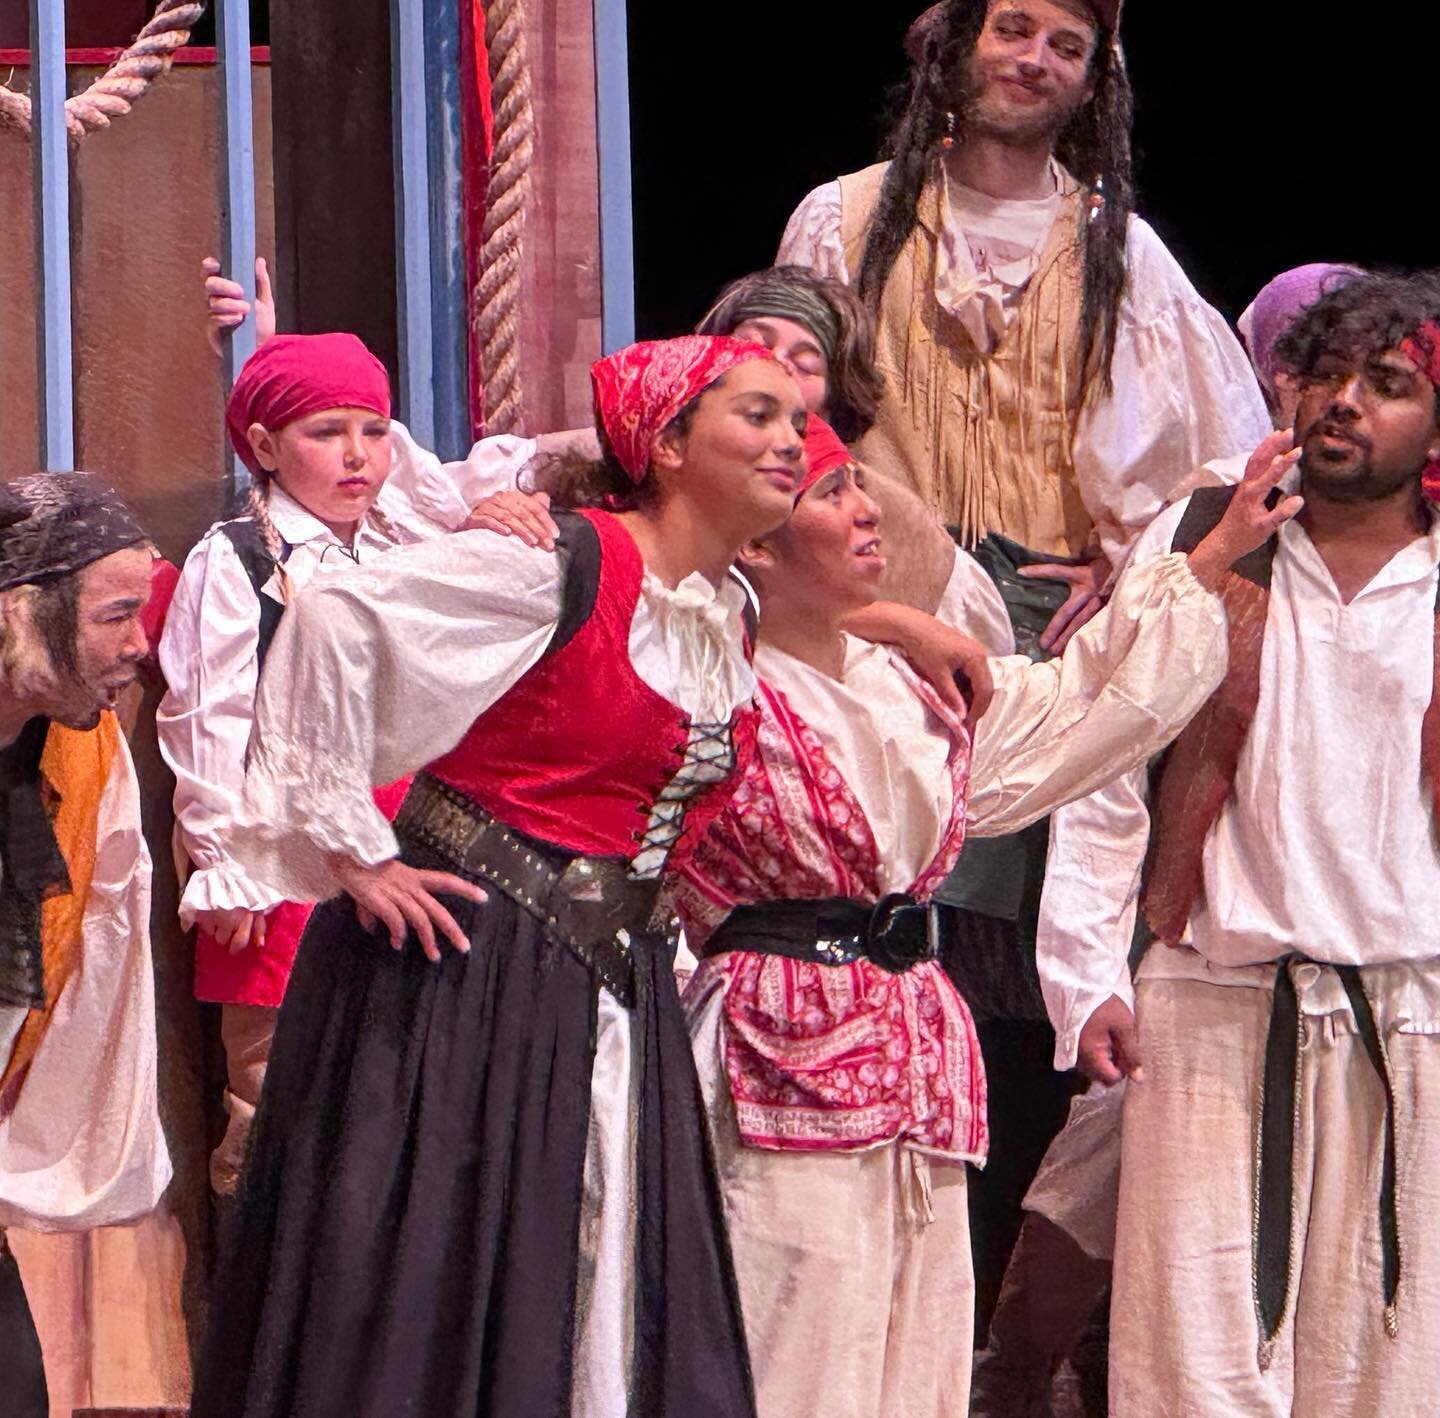 Sirena and her pirates. Such great audience enthusiasm for this Musical - we are all overjoyed! Please share with friends. Shows are continuing with a final matinee show 7/2. Children welcome!